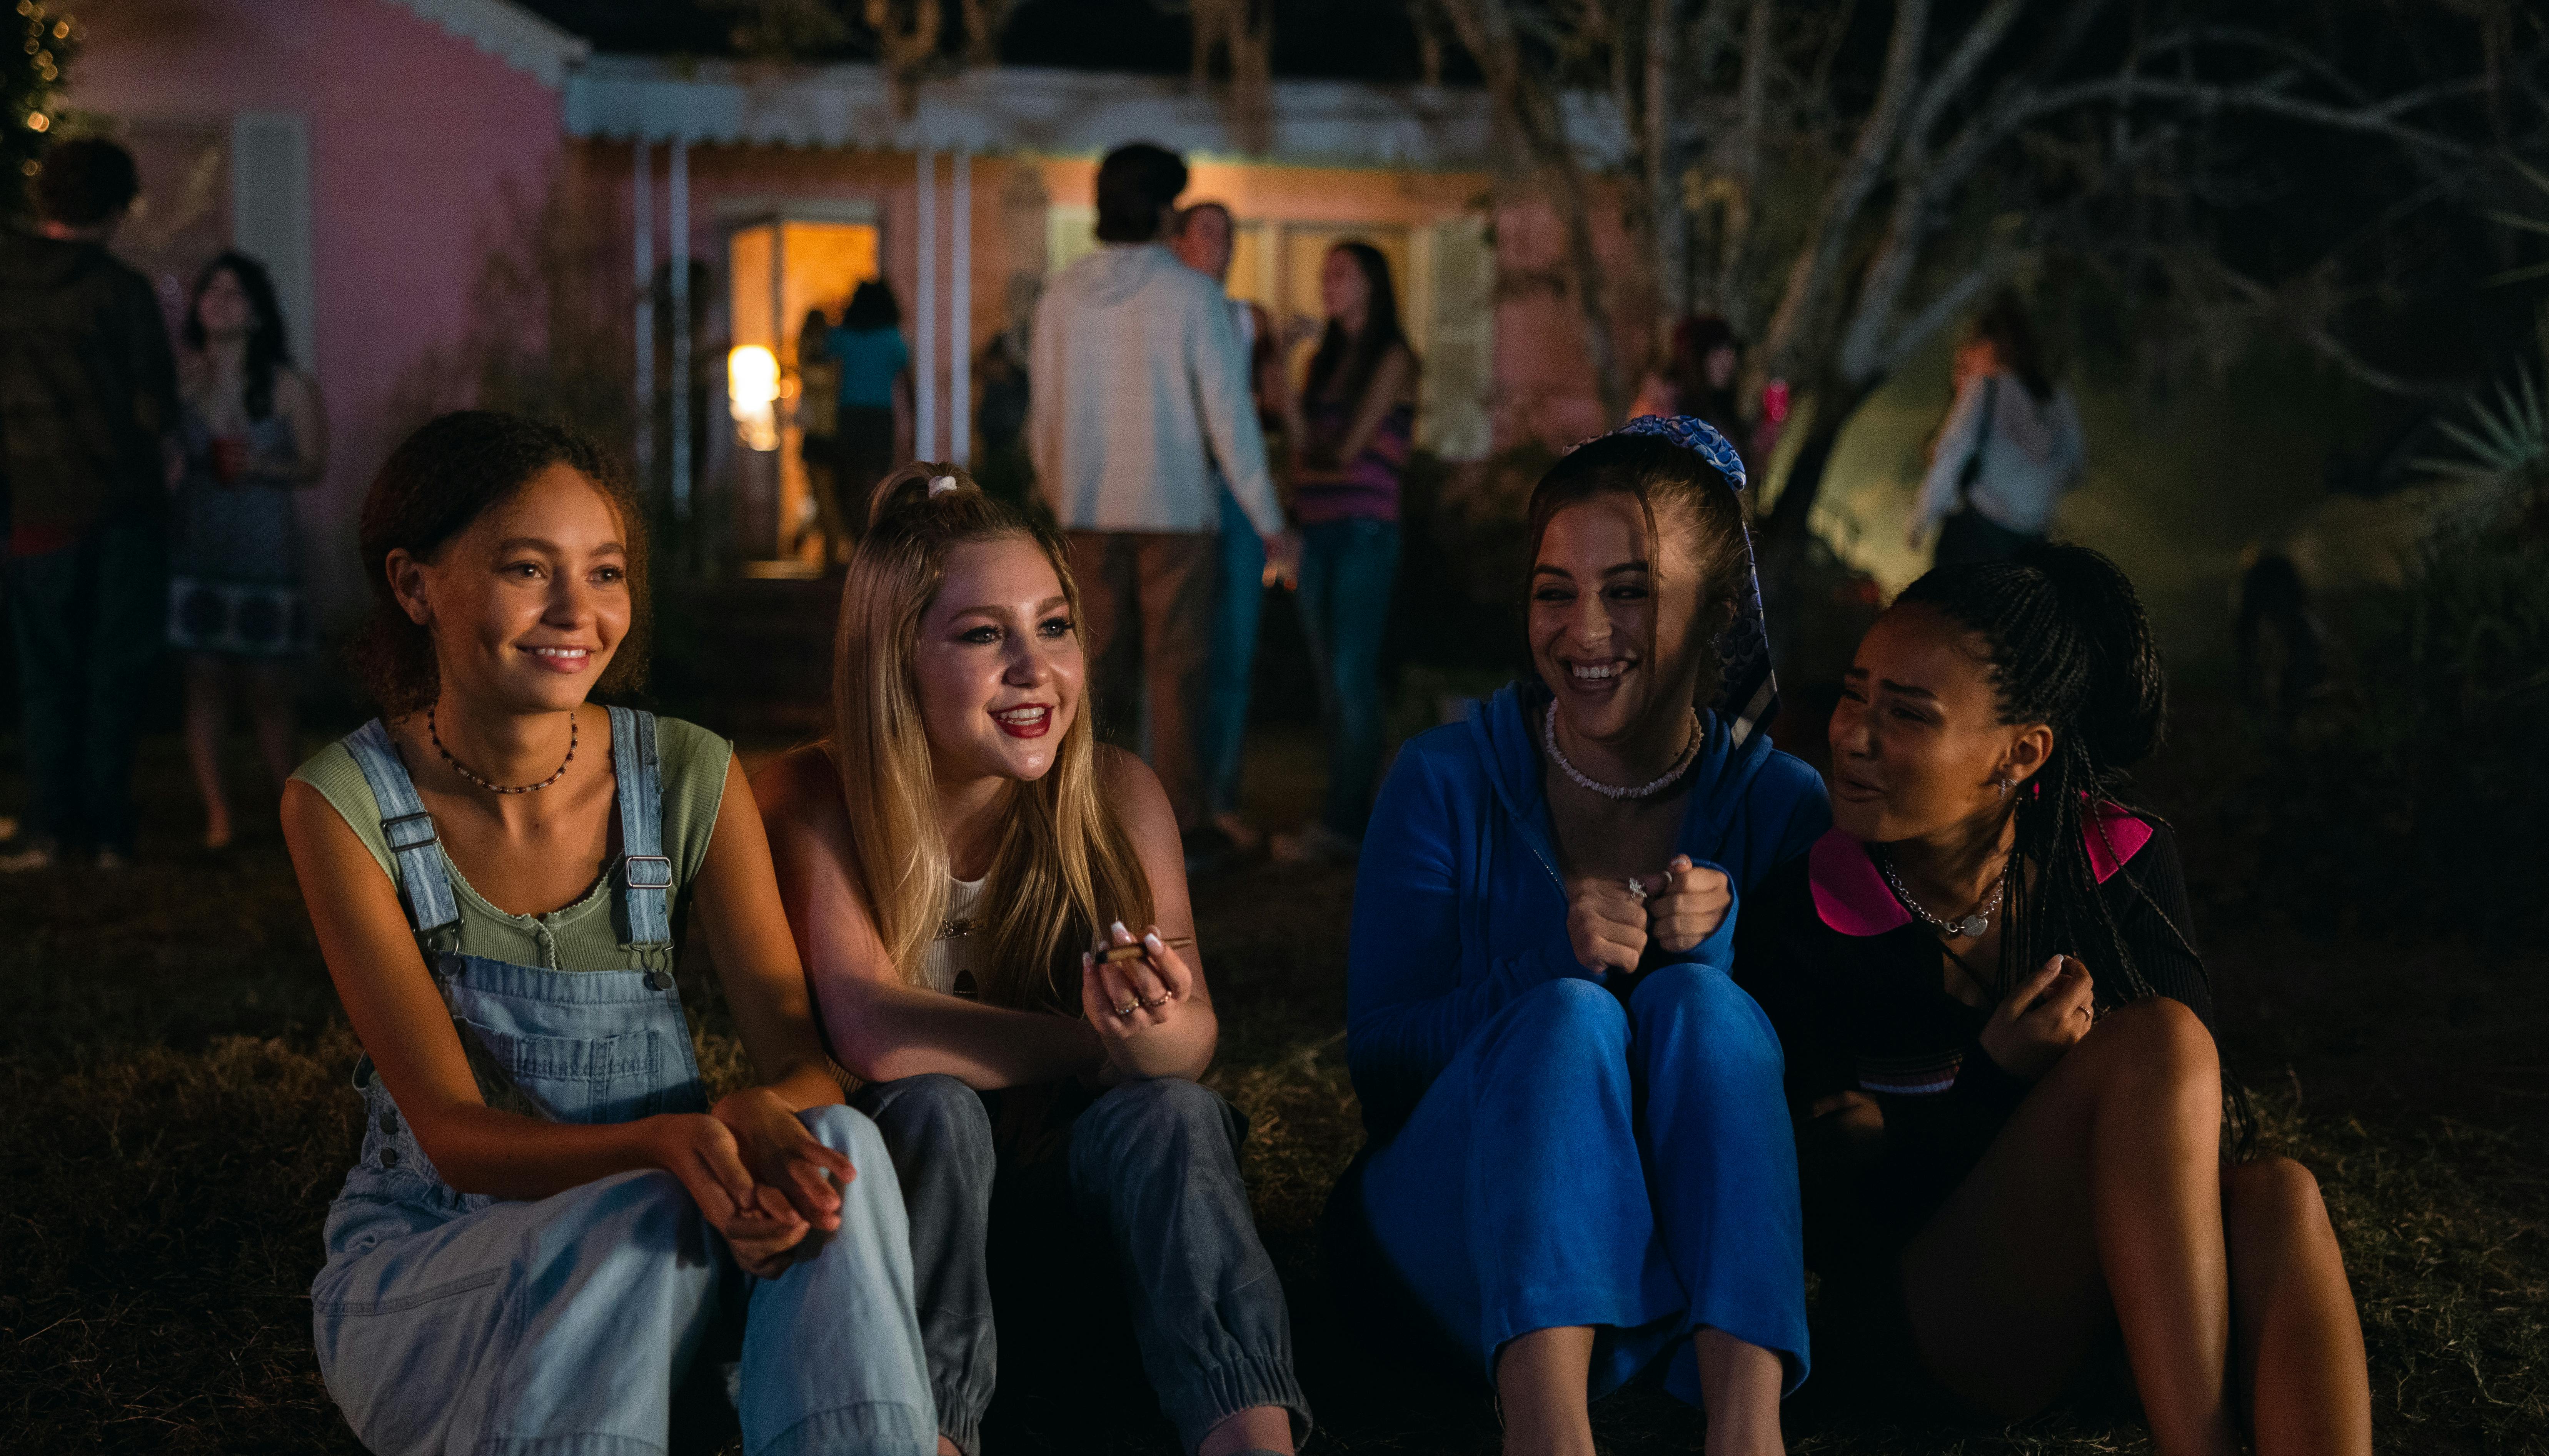 Nico Parker, Ella Anderson, Ariel Martin and Daniella Taylor in SUNCOAST. Photo by Eric Zachanowich. Courtesy of Searchlight Pictures. © 2023 Searchlight Pictures All Rights Reserved.